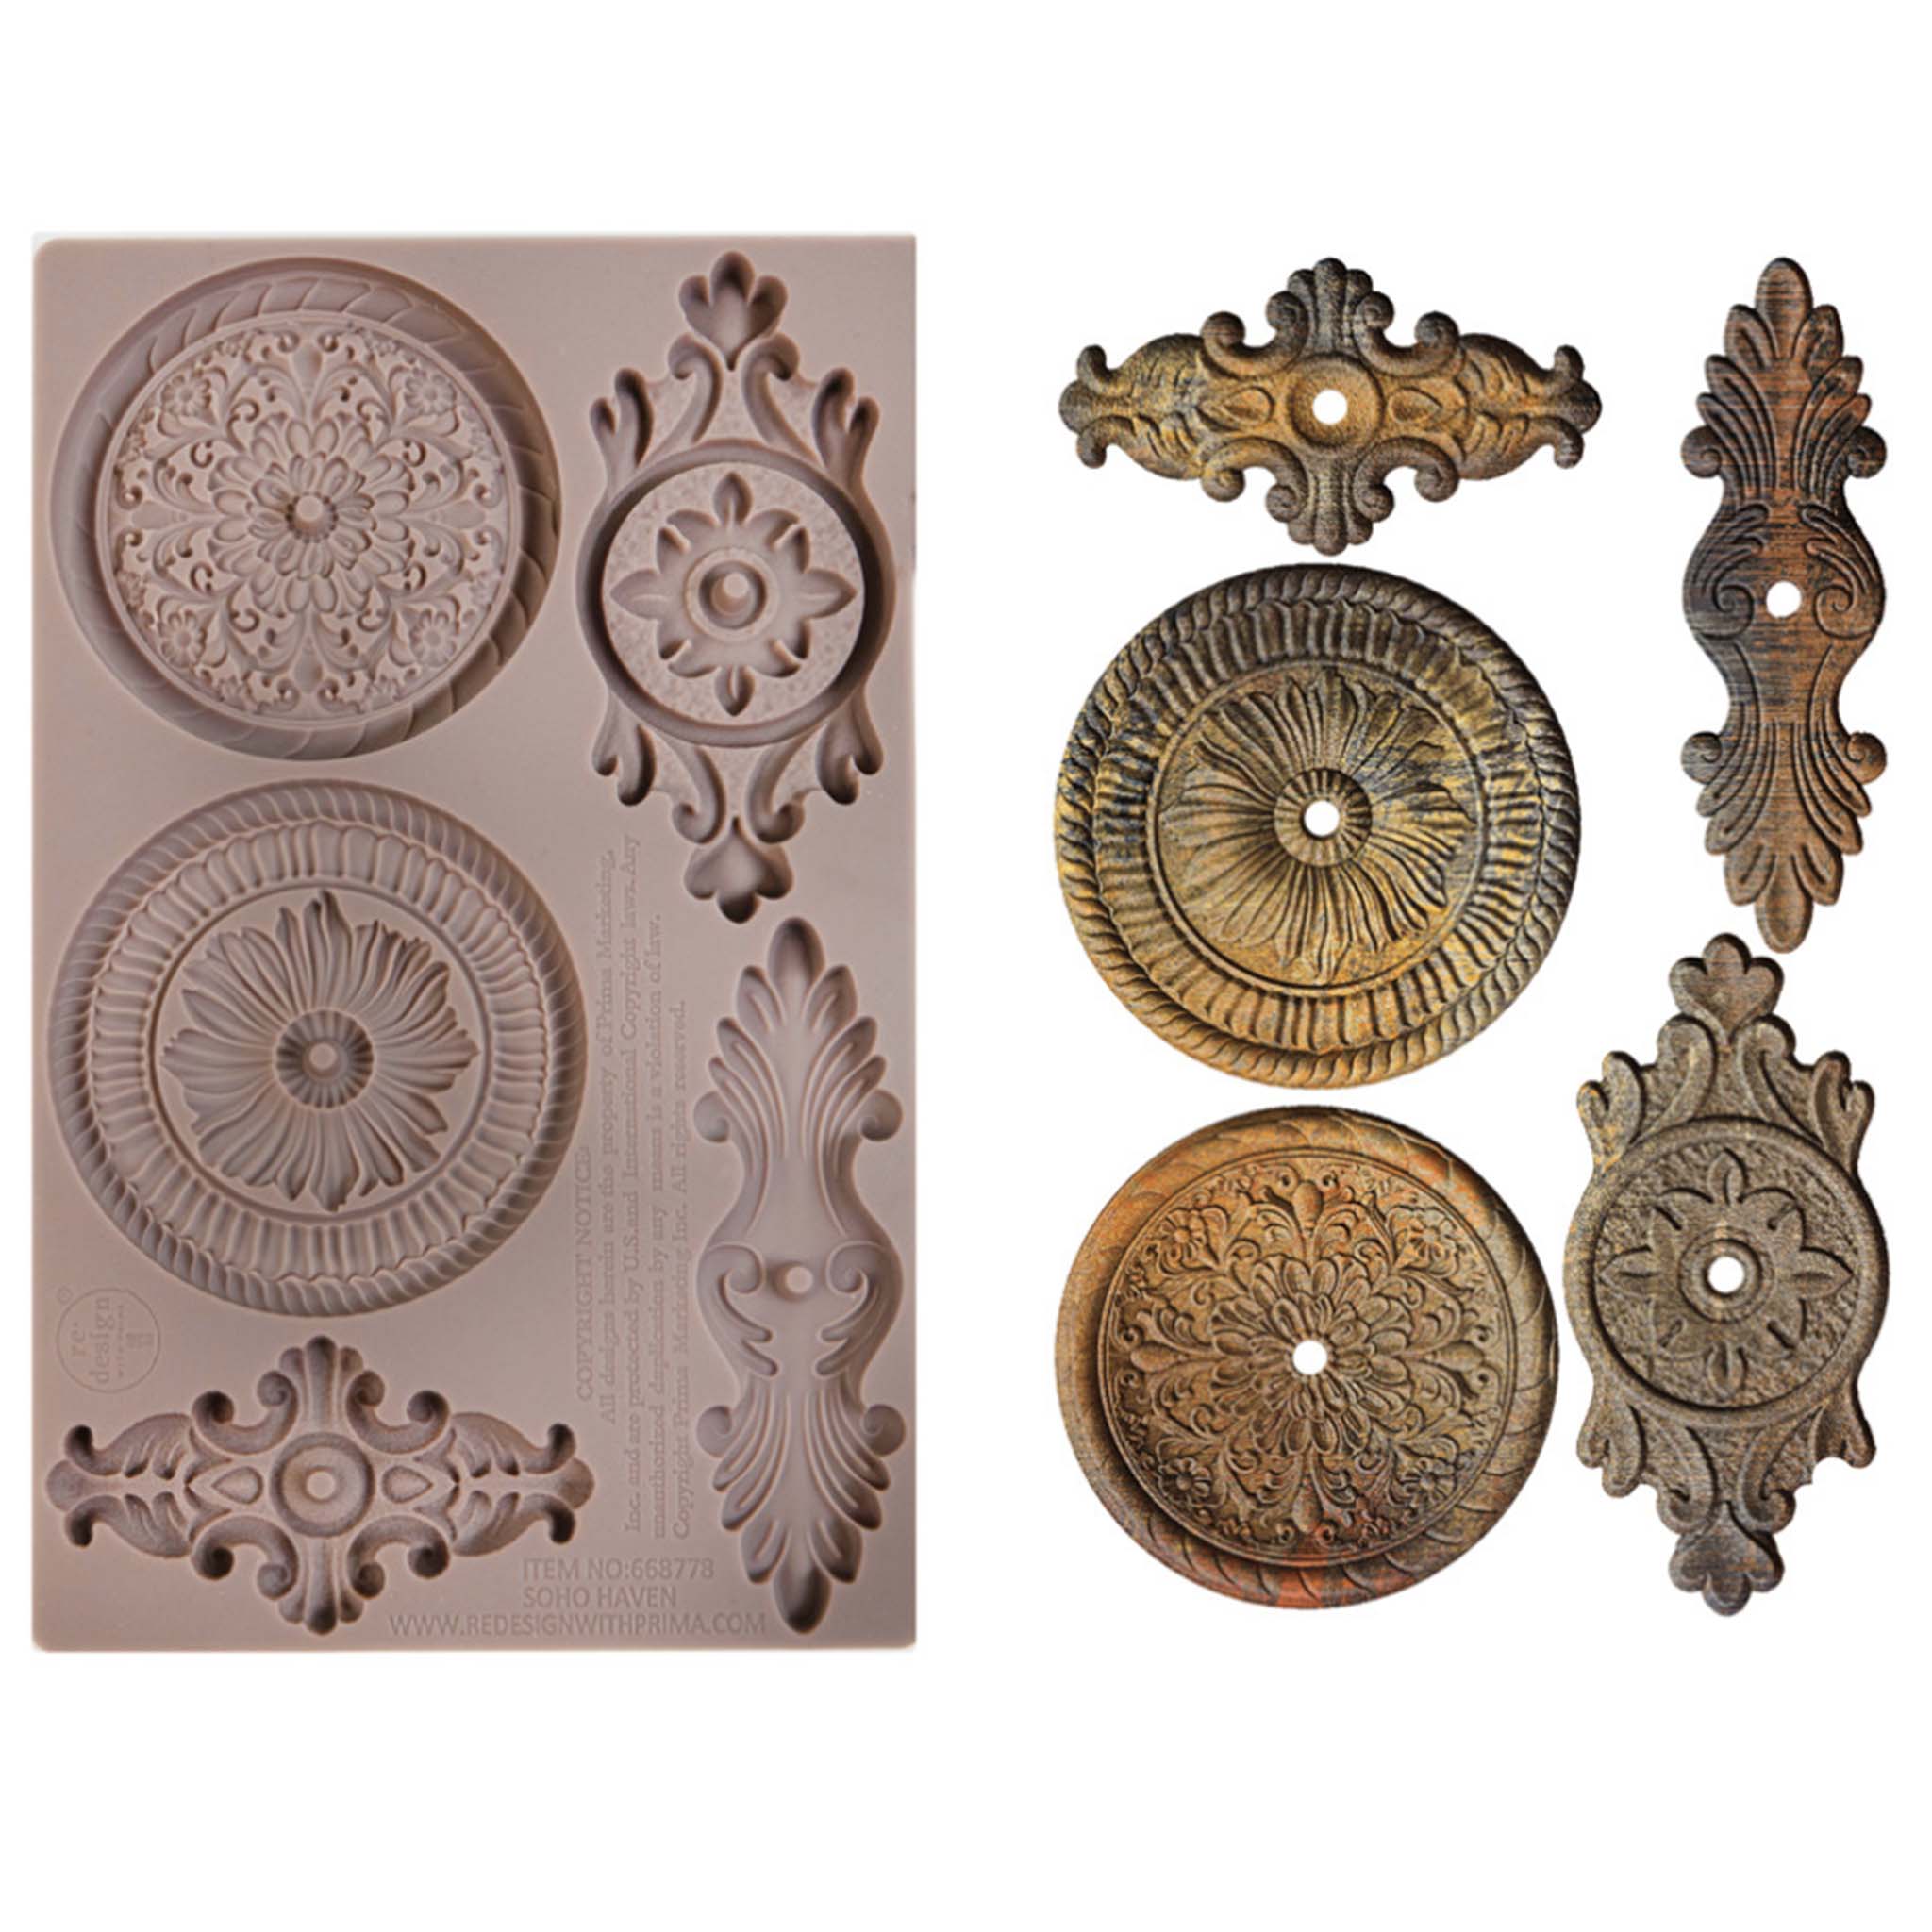 A brown silicone mold and bronze colored castings of 5 ornate drawer pull plates are against a white background.